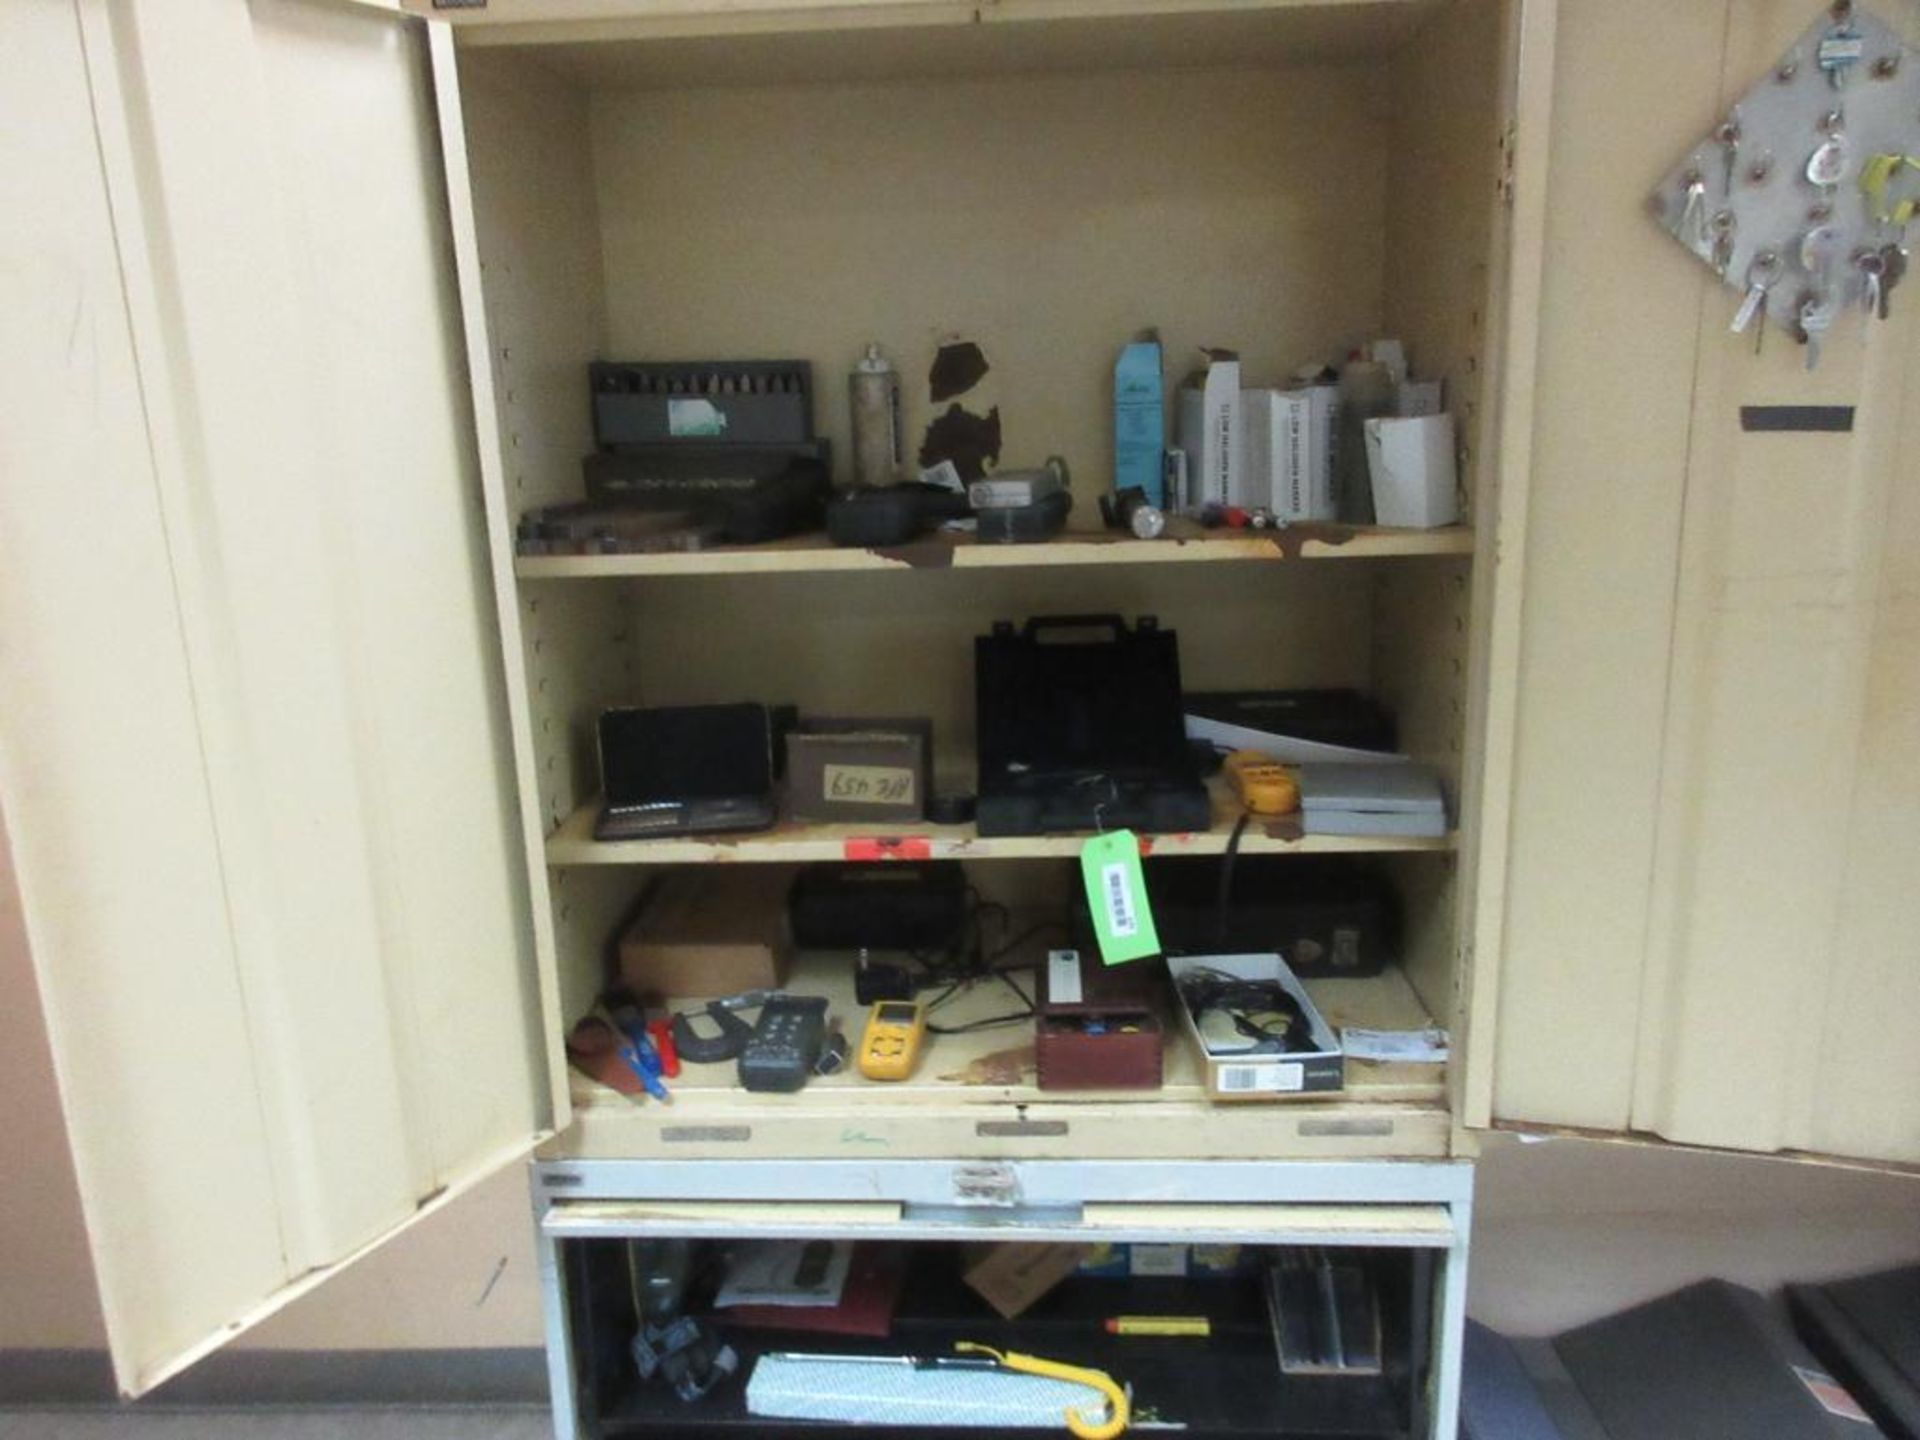 CONTENTS OF 3 CABINETS IN WORK AREA, TEST AND MEASUREMENT EQUIPMENT, METERS, TOOLS, ETC (OFFICES)